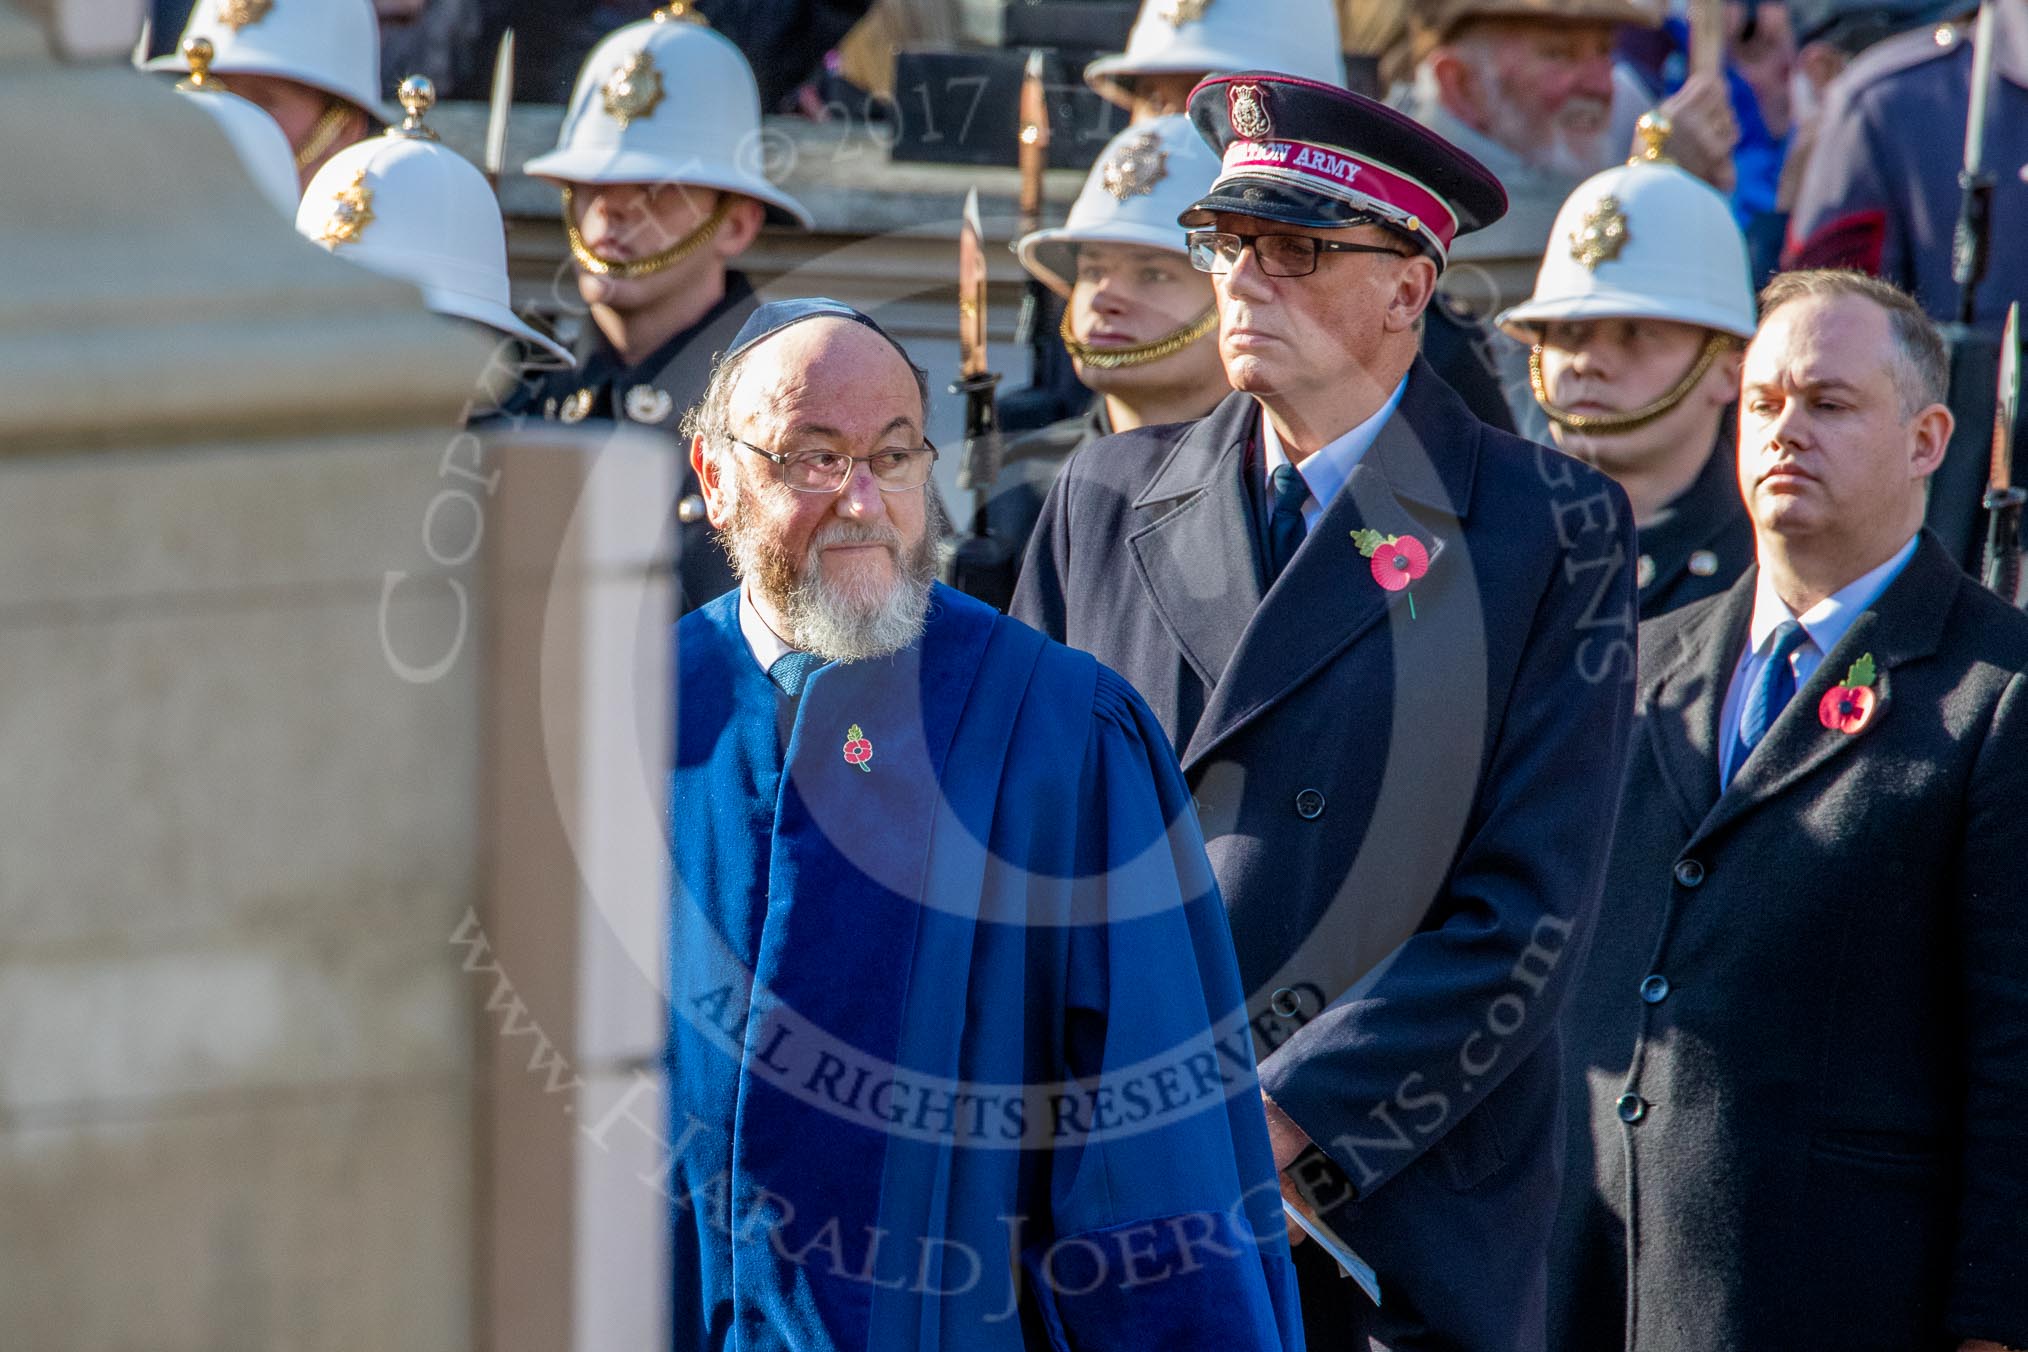 Representatives of the faith communities returning to the Foreign and Commonwealth Office during the Remembrance Sunday Cenotaph Ceremony 2018 at Horse Guards Parade, Westminster, London, 11 November 2018, 11:25.